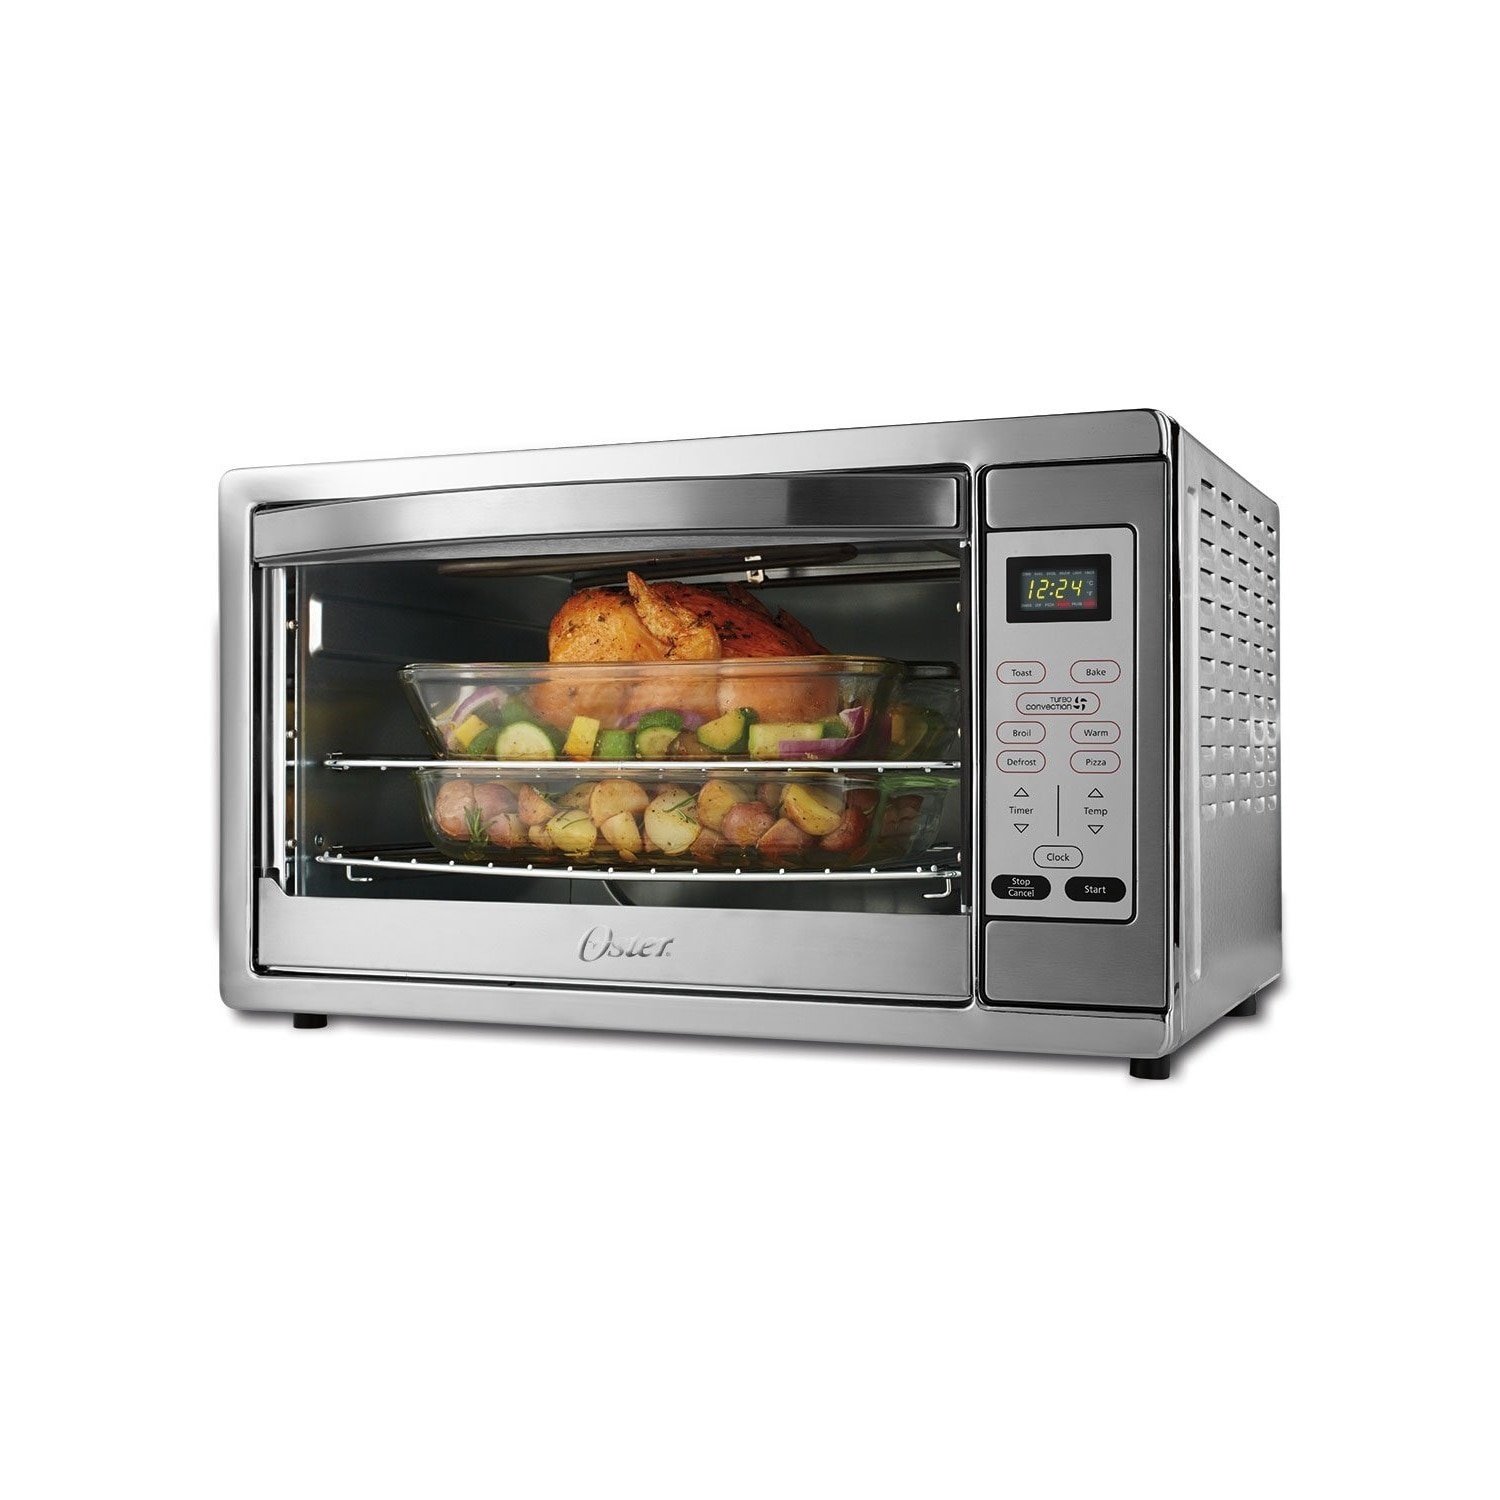 Shop Oster Extra Large Digital Countertop Oven Overstock 16185726